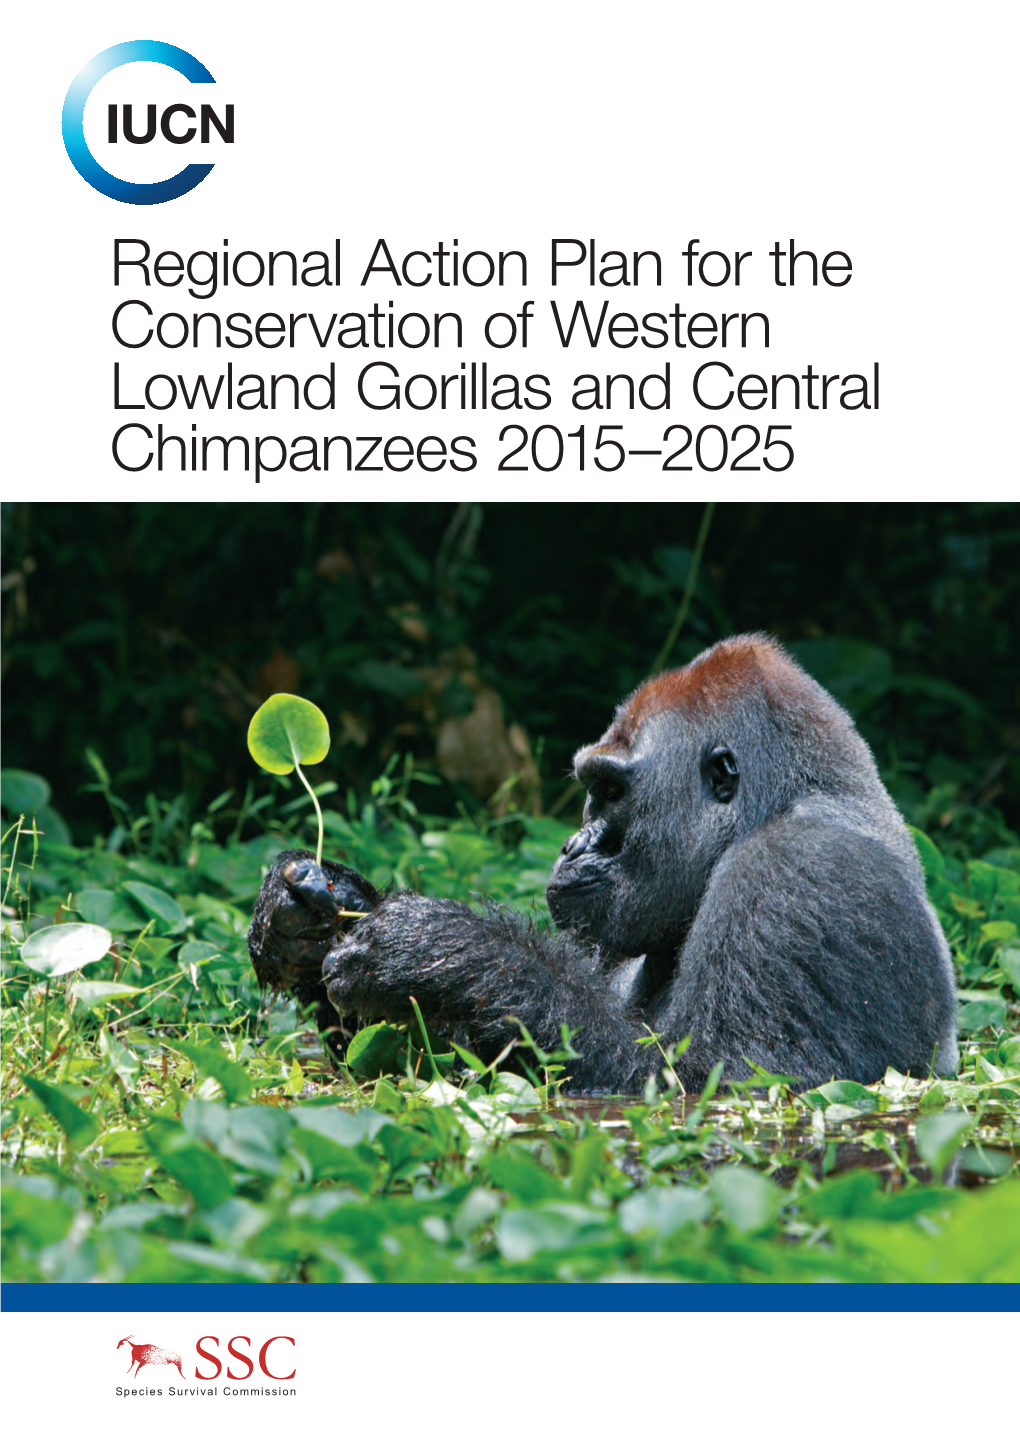 Action Plan for Great Apes in Western Equatorial Africa Corrected